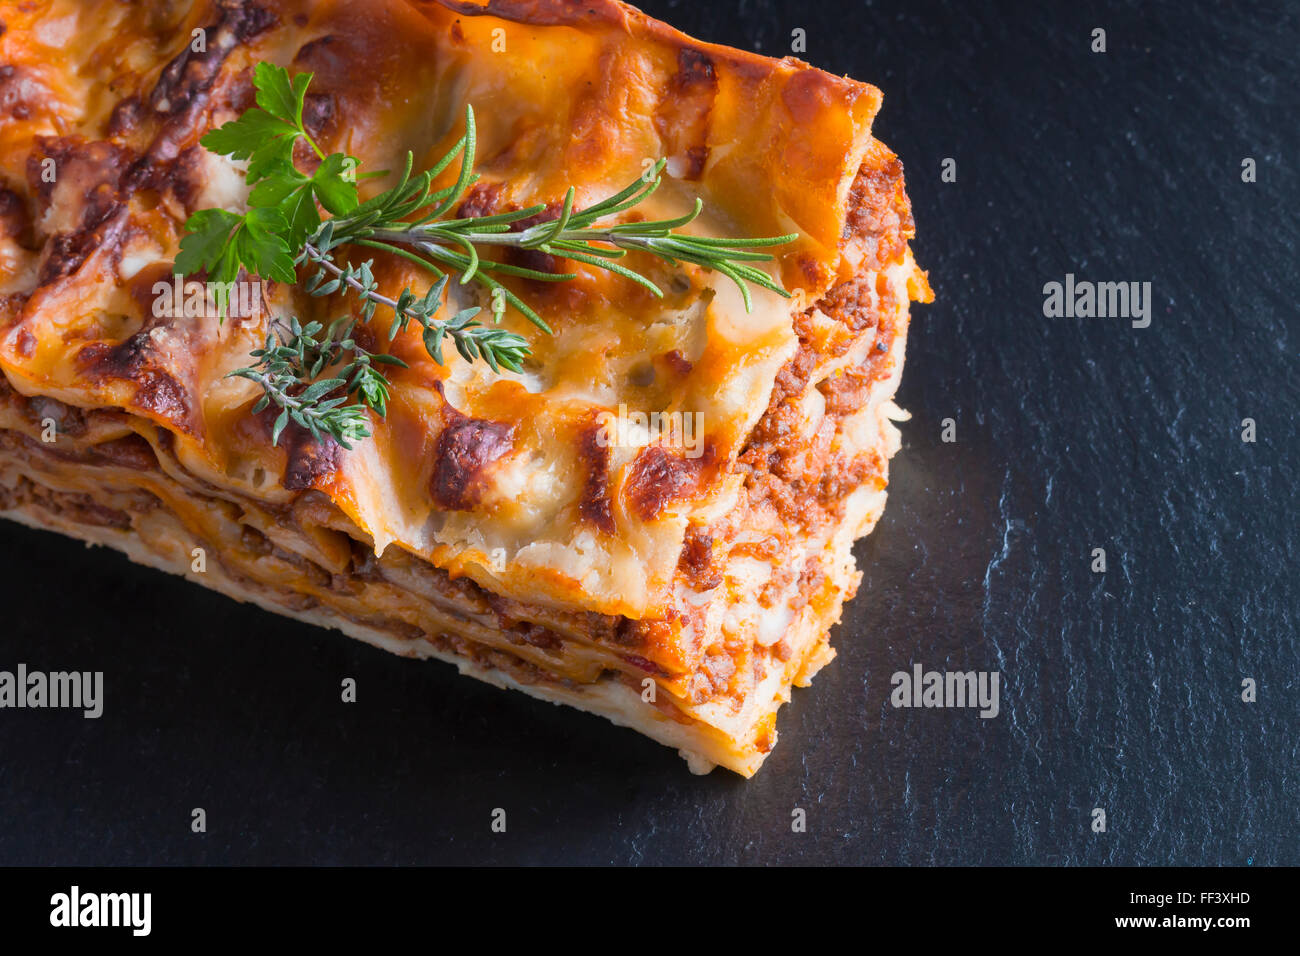 319,107 Steaming Hot Food Images, Stock Photos, 3D objects